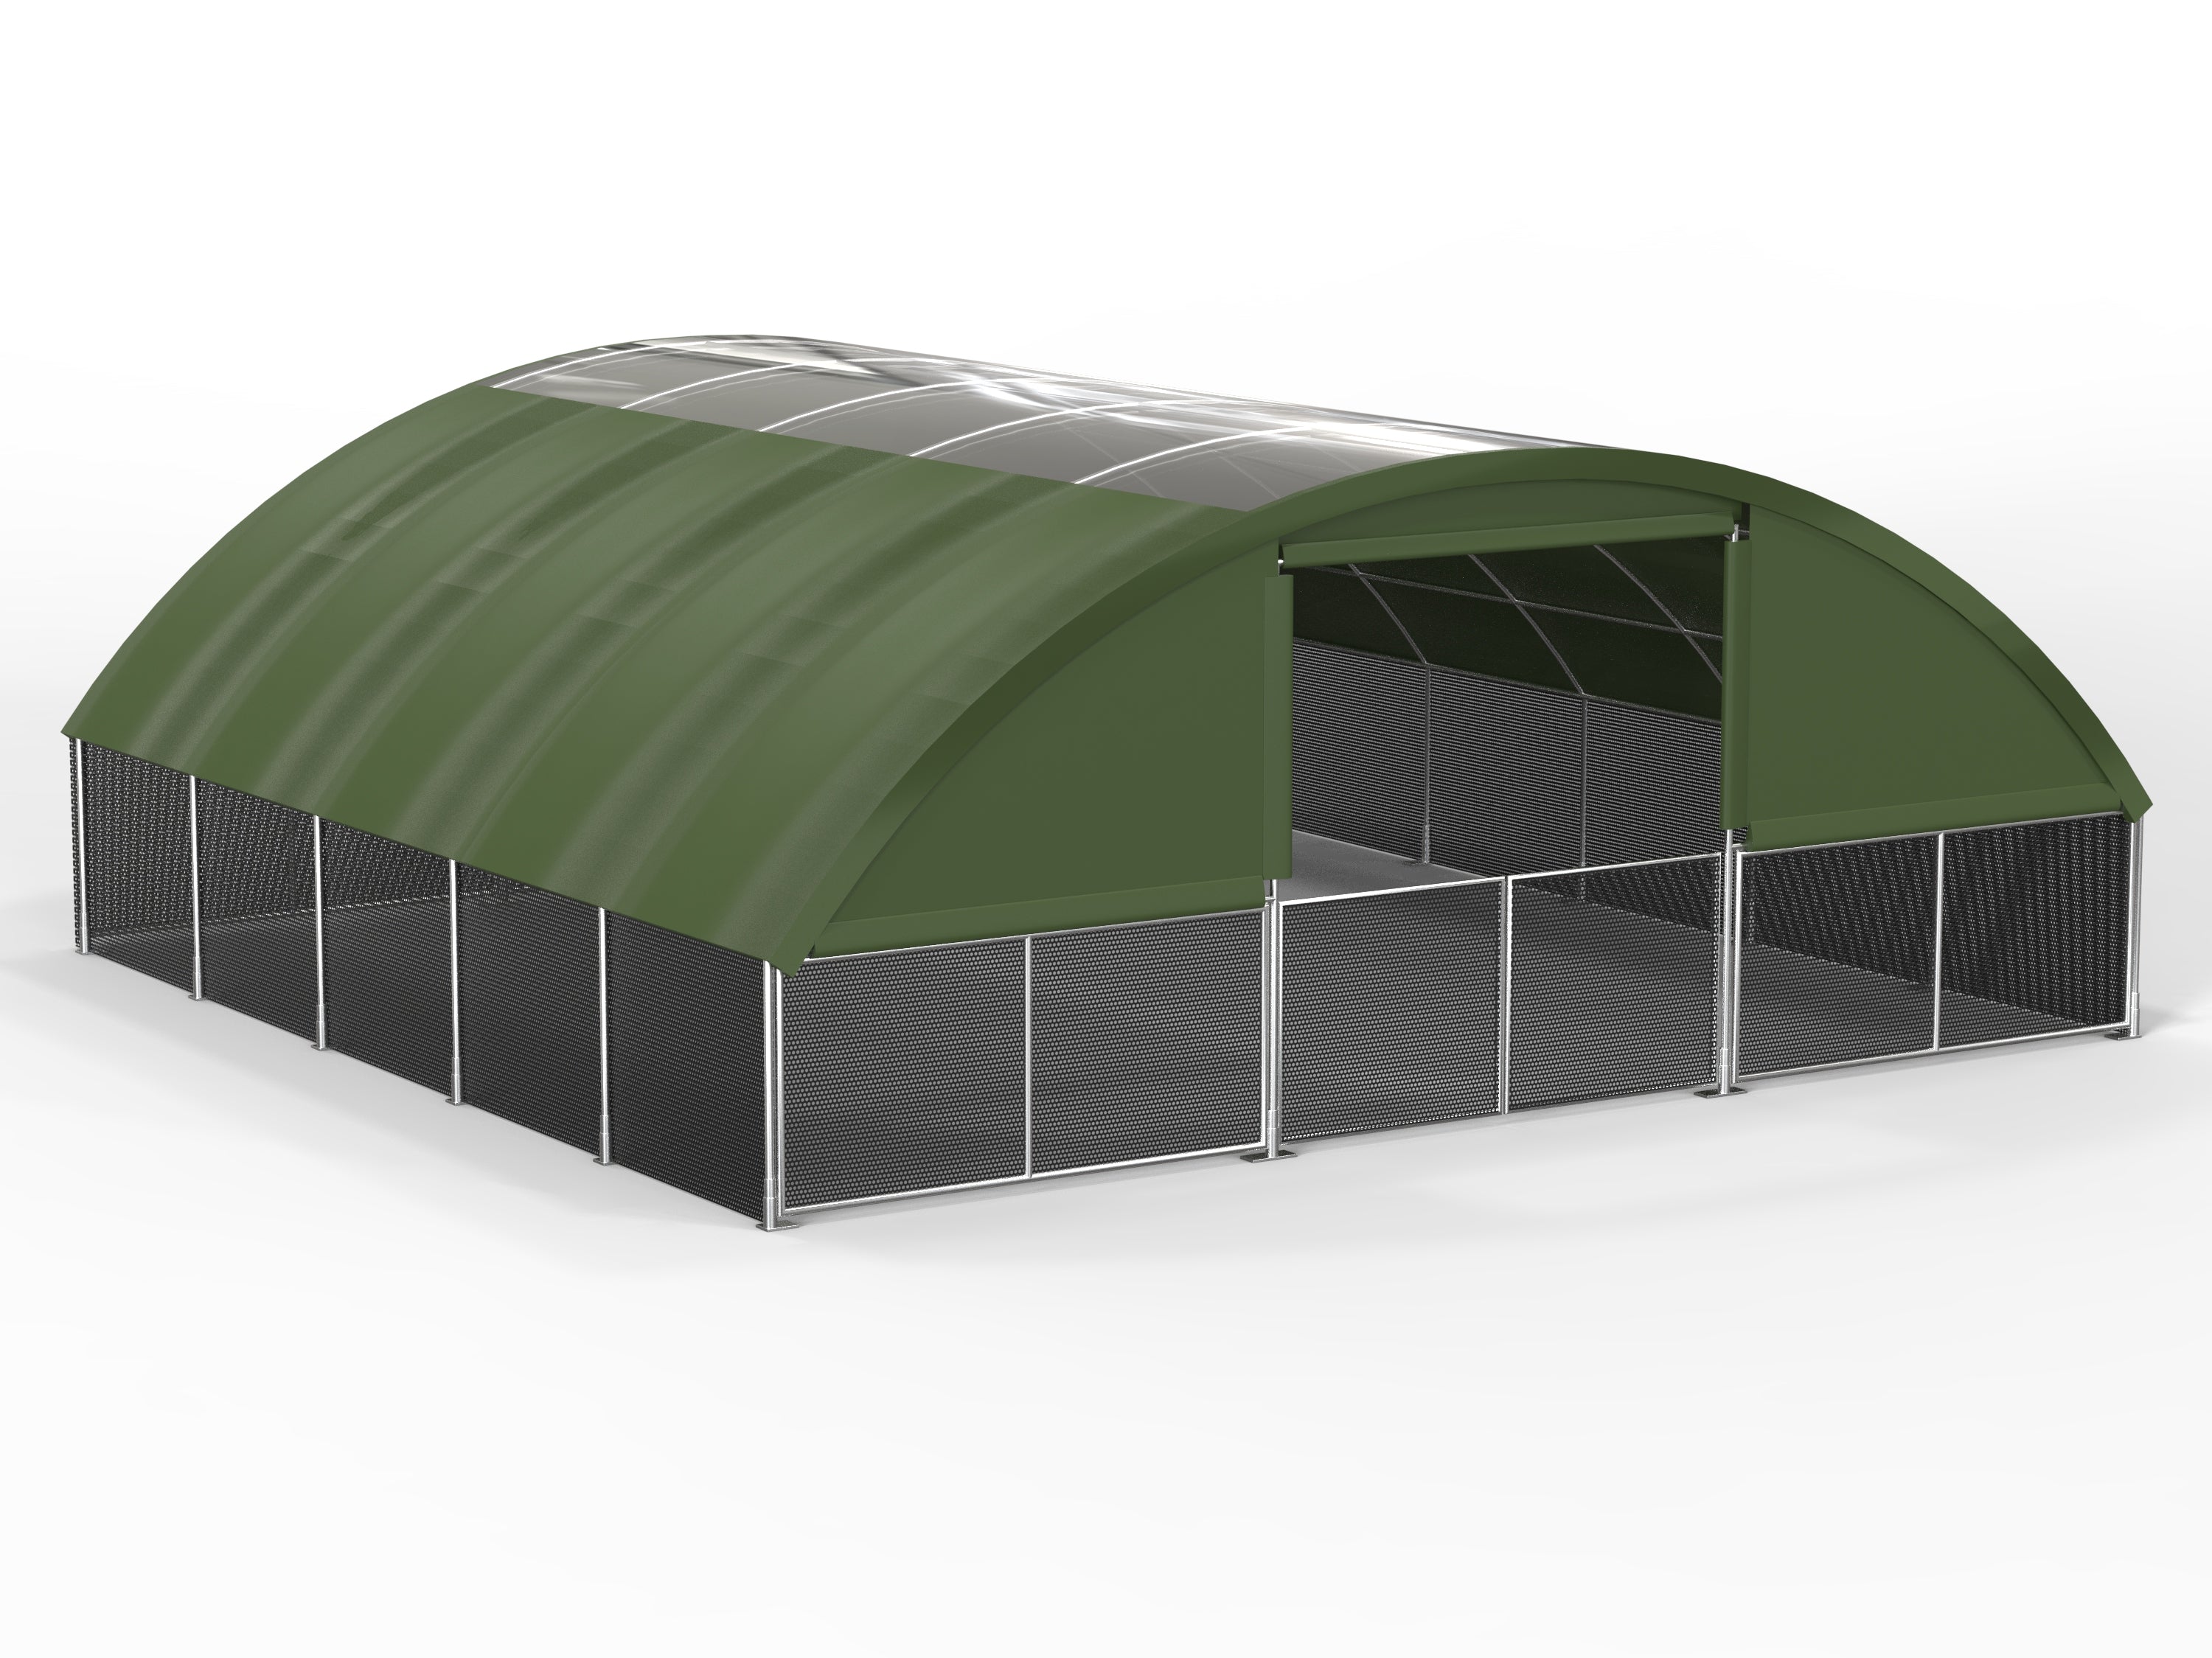 AgriculturalShelters10x10.548